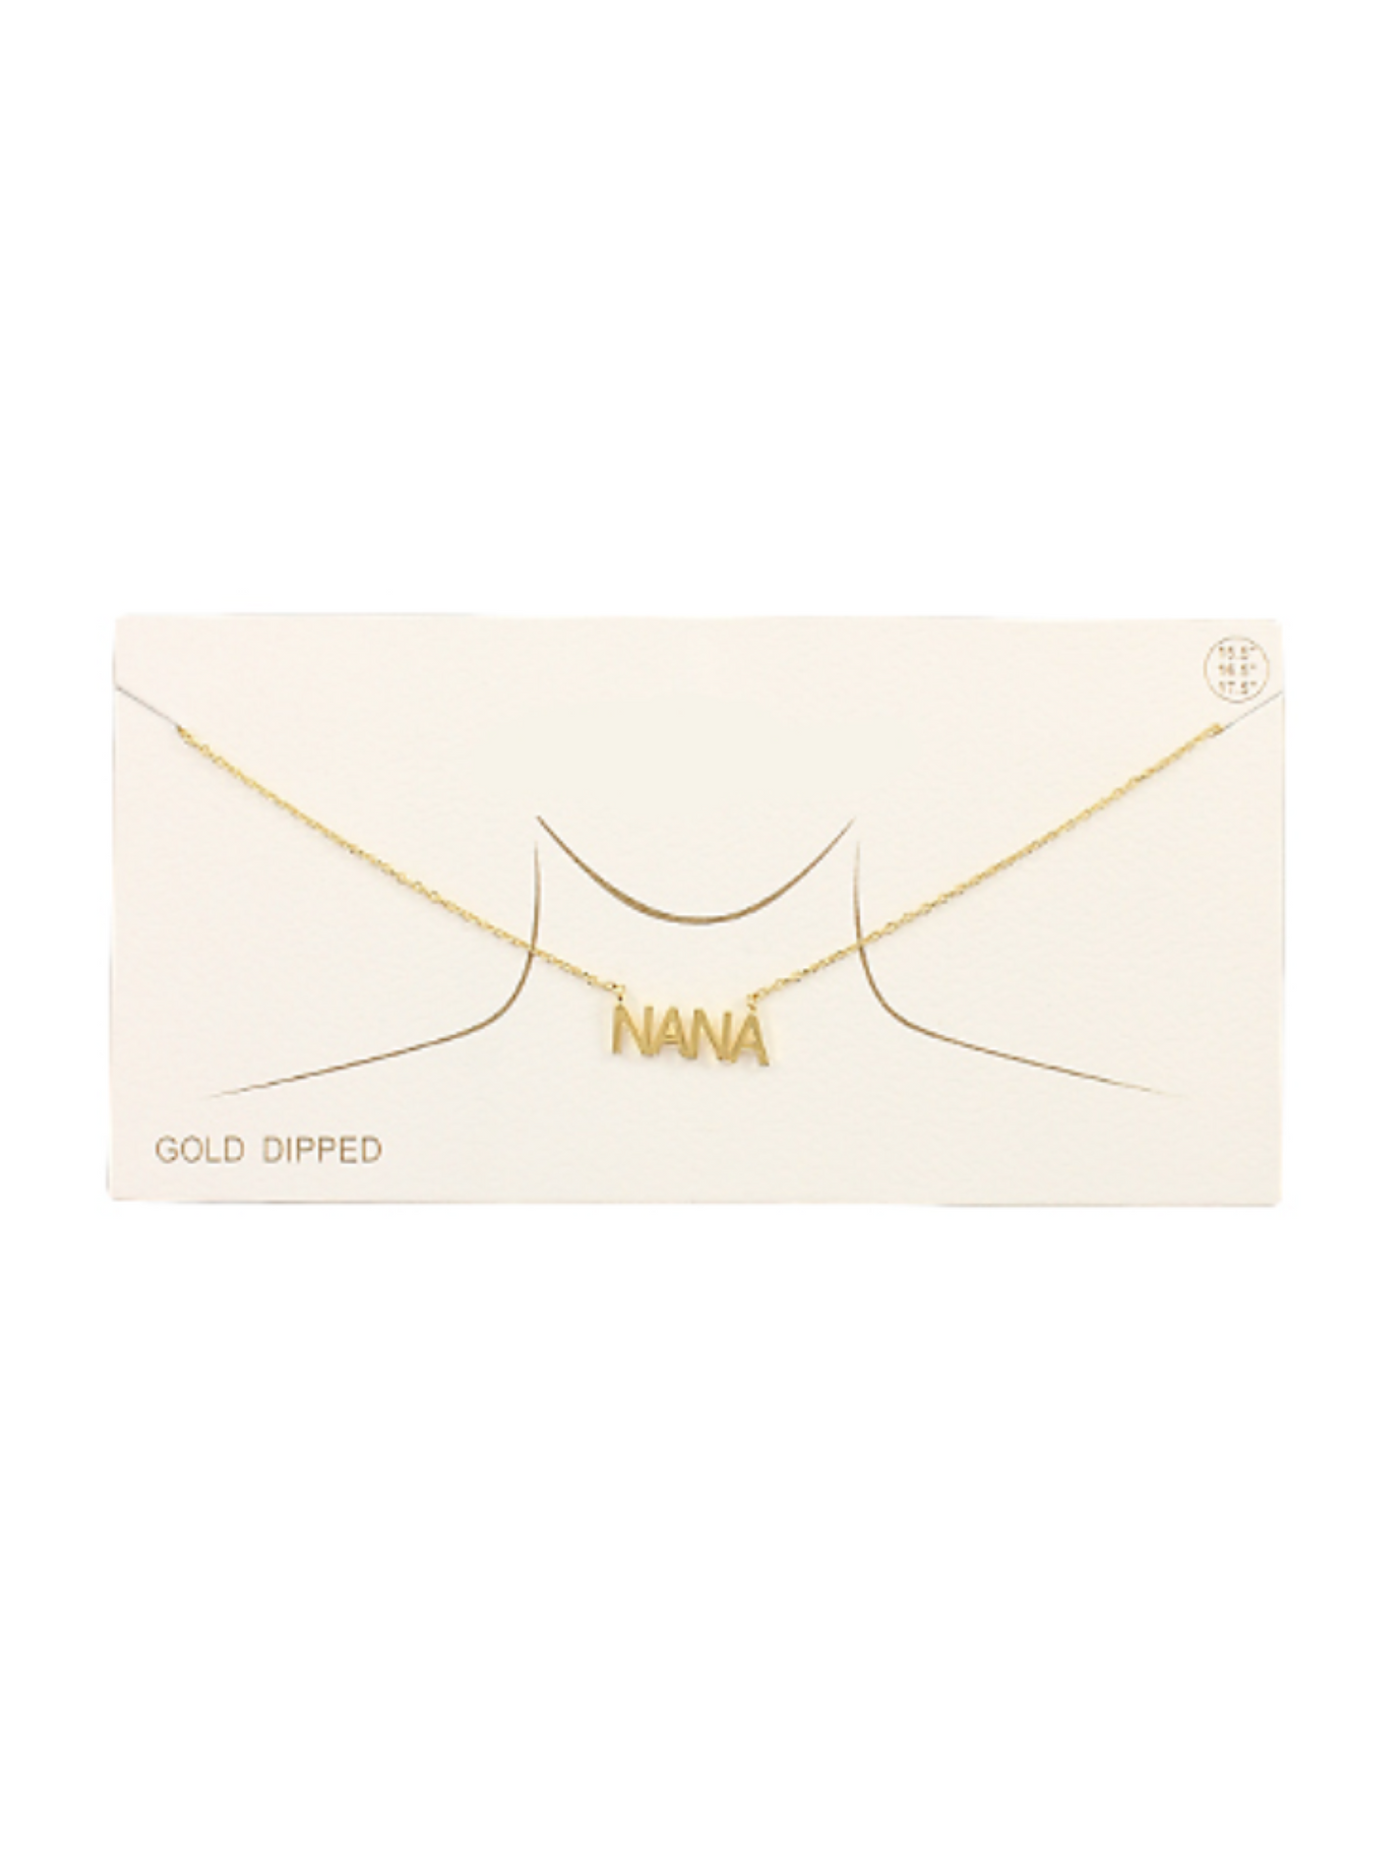 Dainty Gold "Nana" Necklace in brushed gold on necklace card on white background.